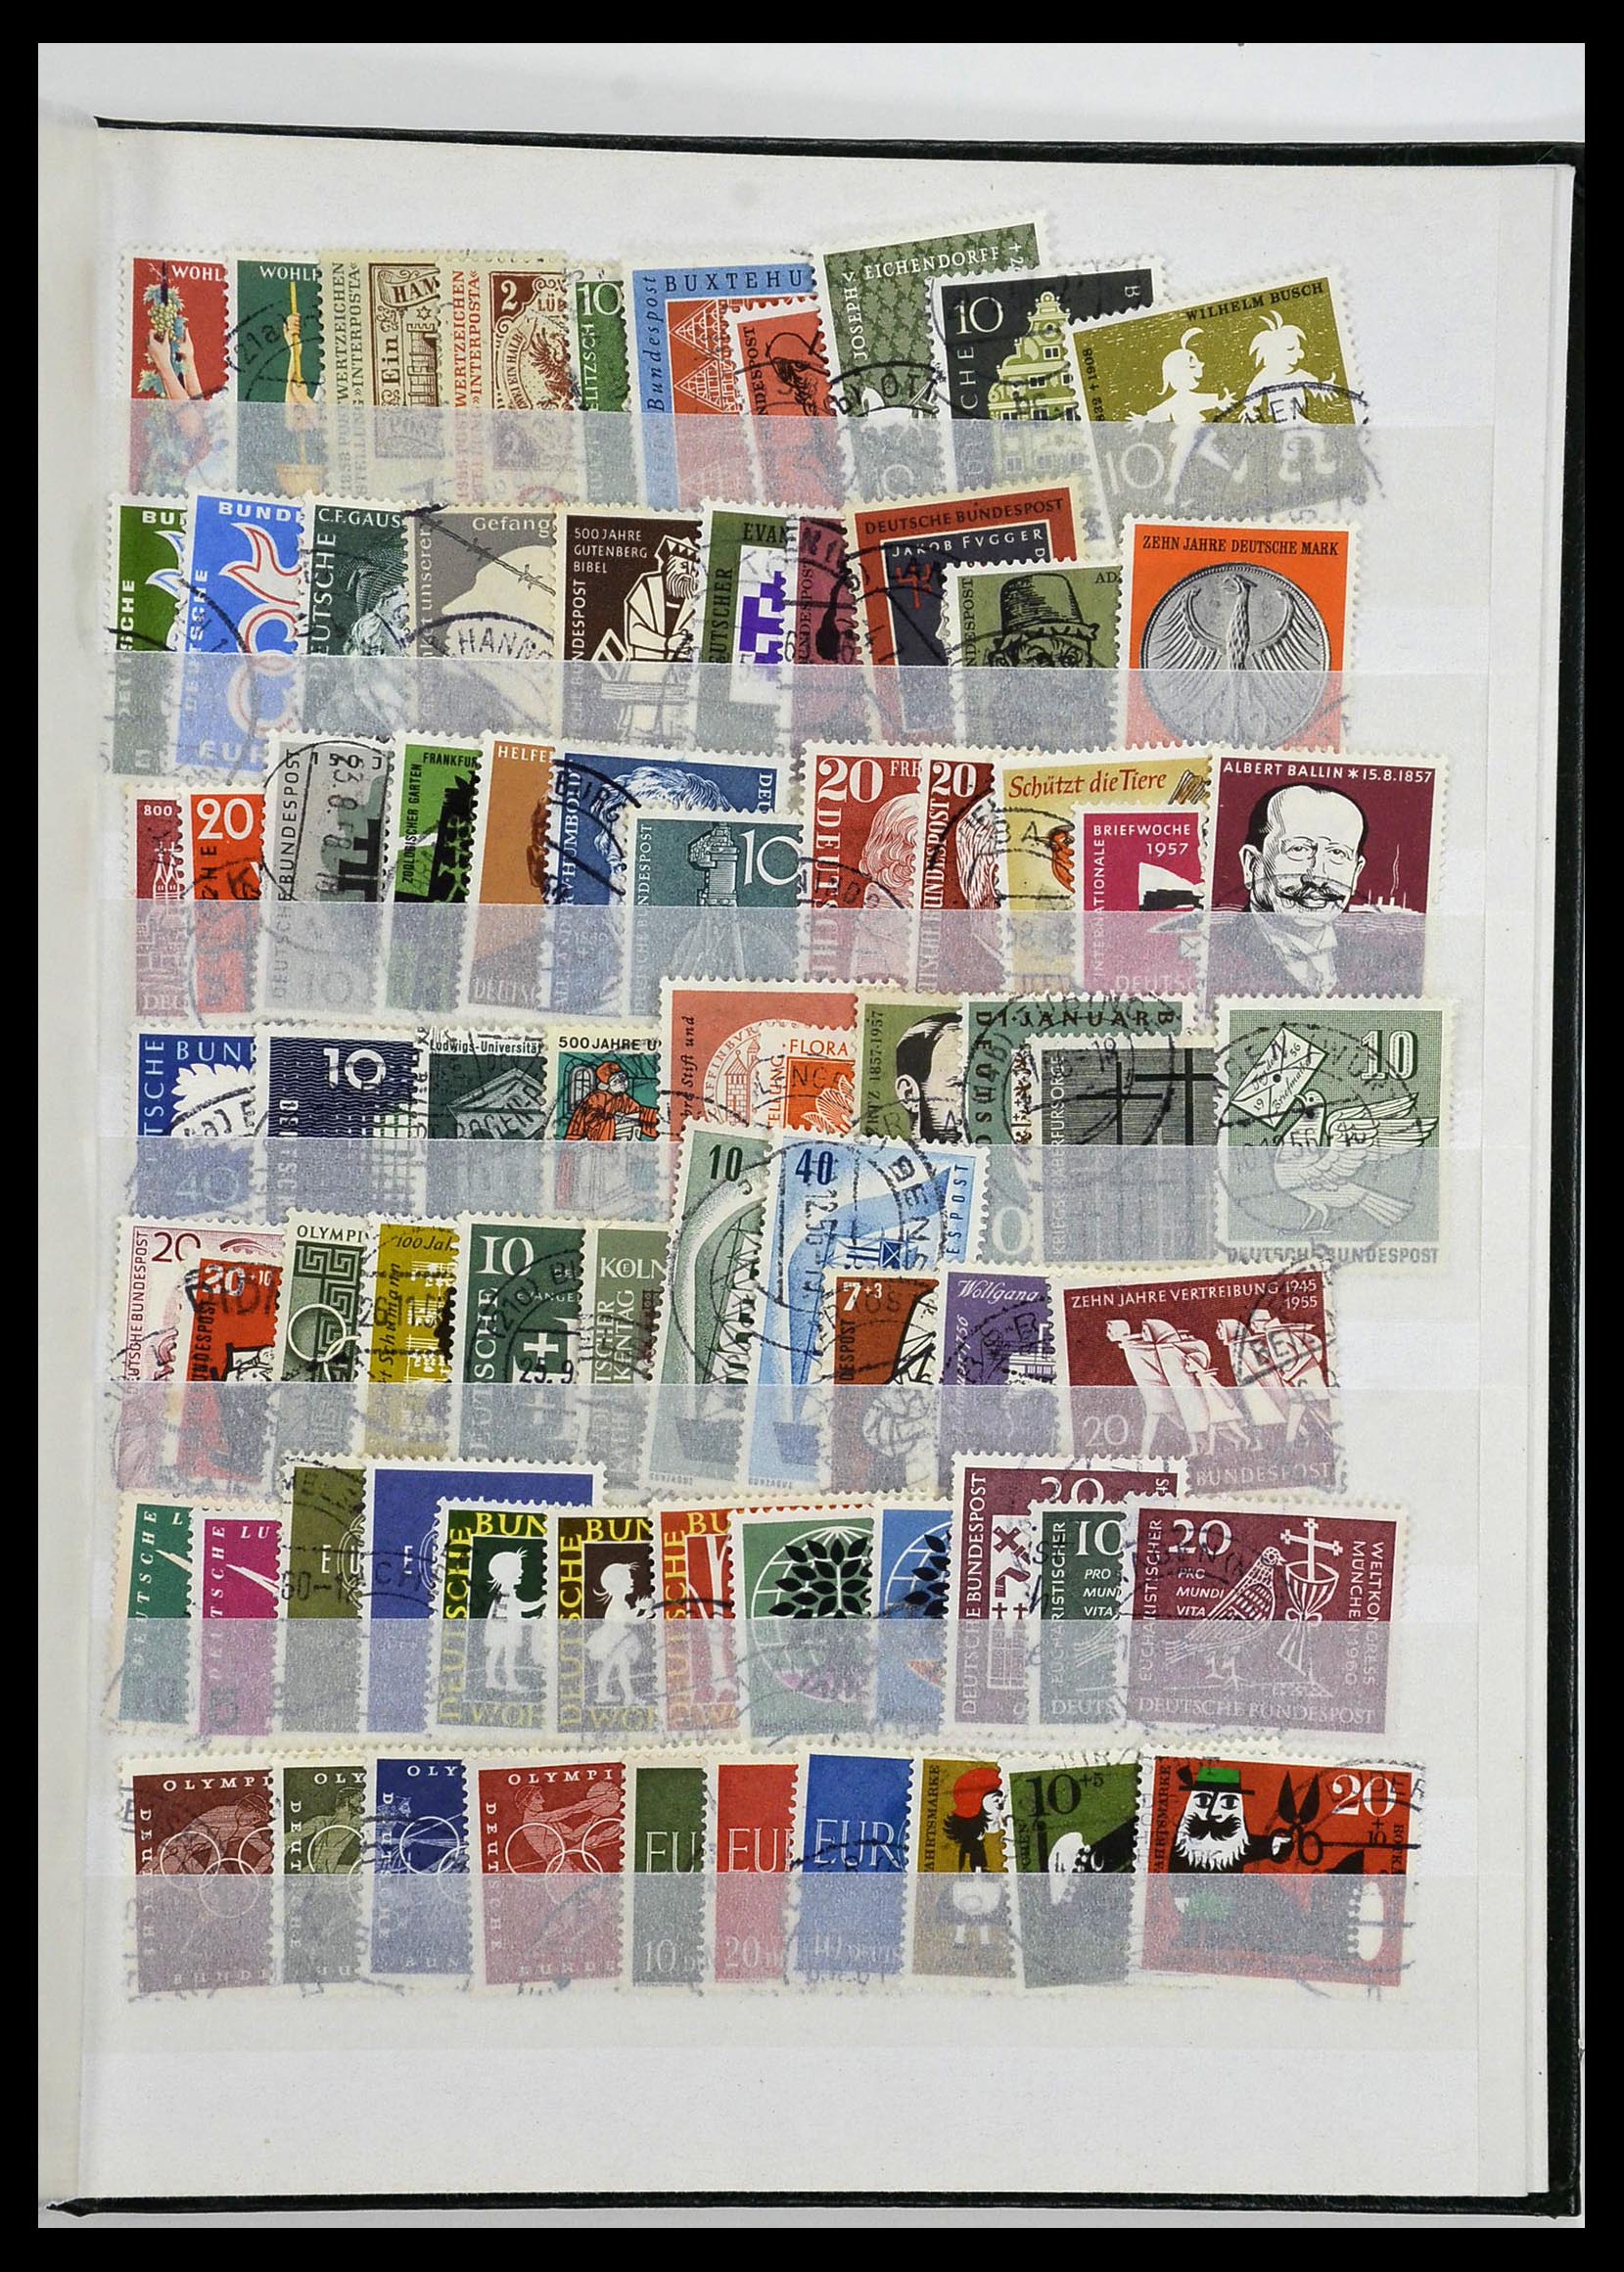 34003 077 - Stamp collection 34003 Bundespost combinations 1950-2020.